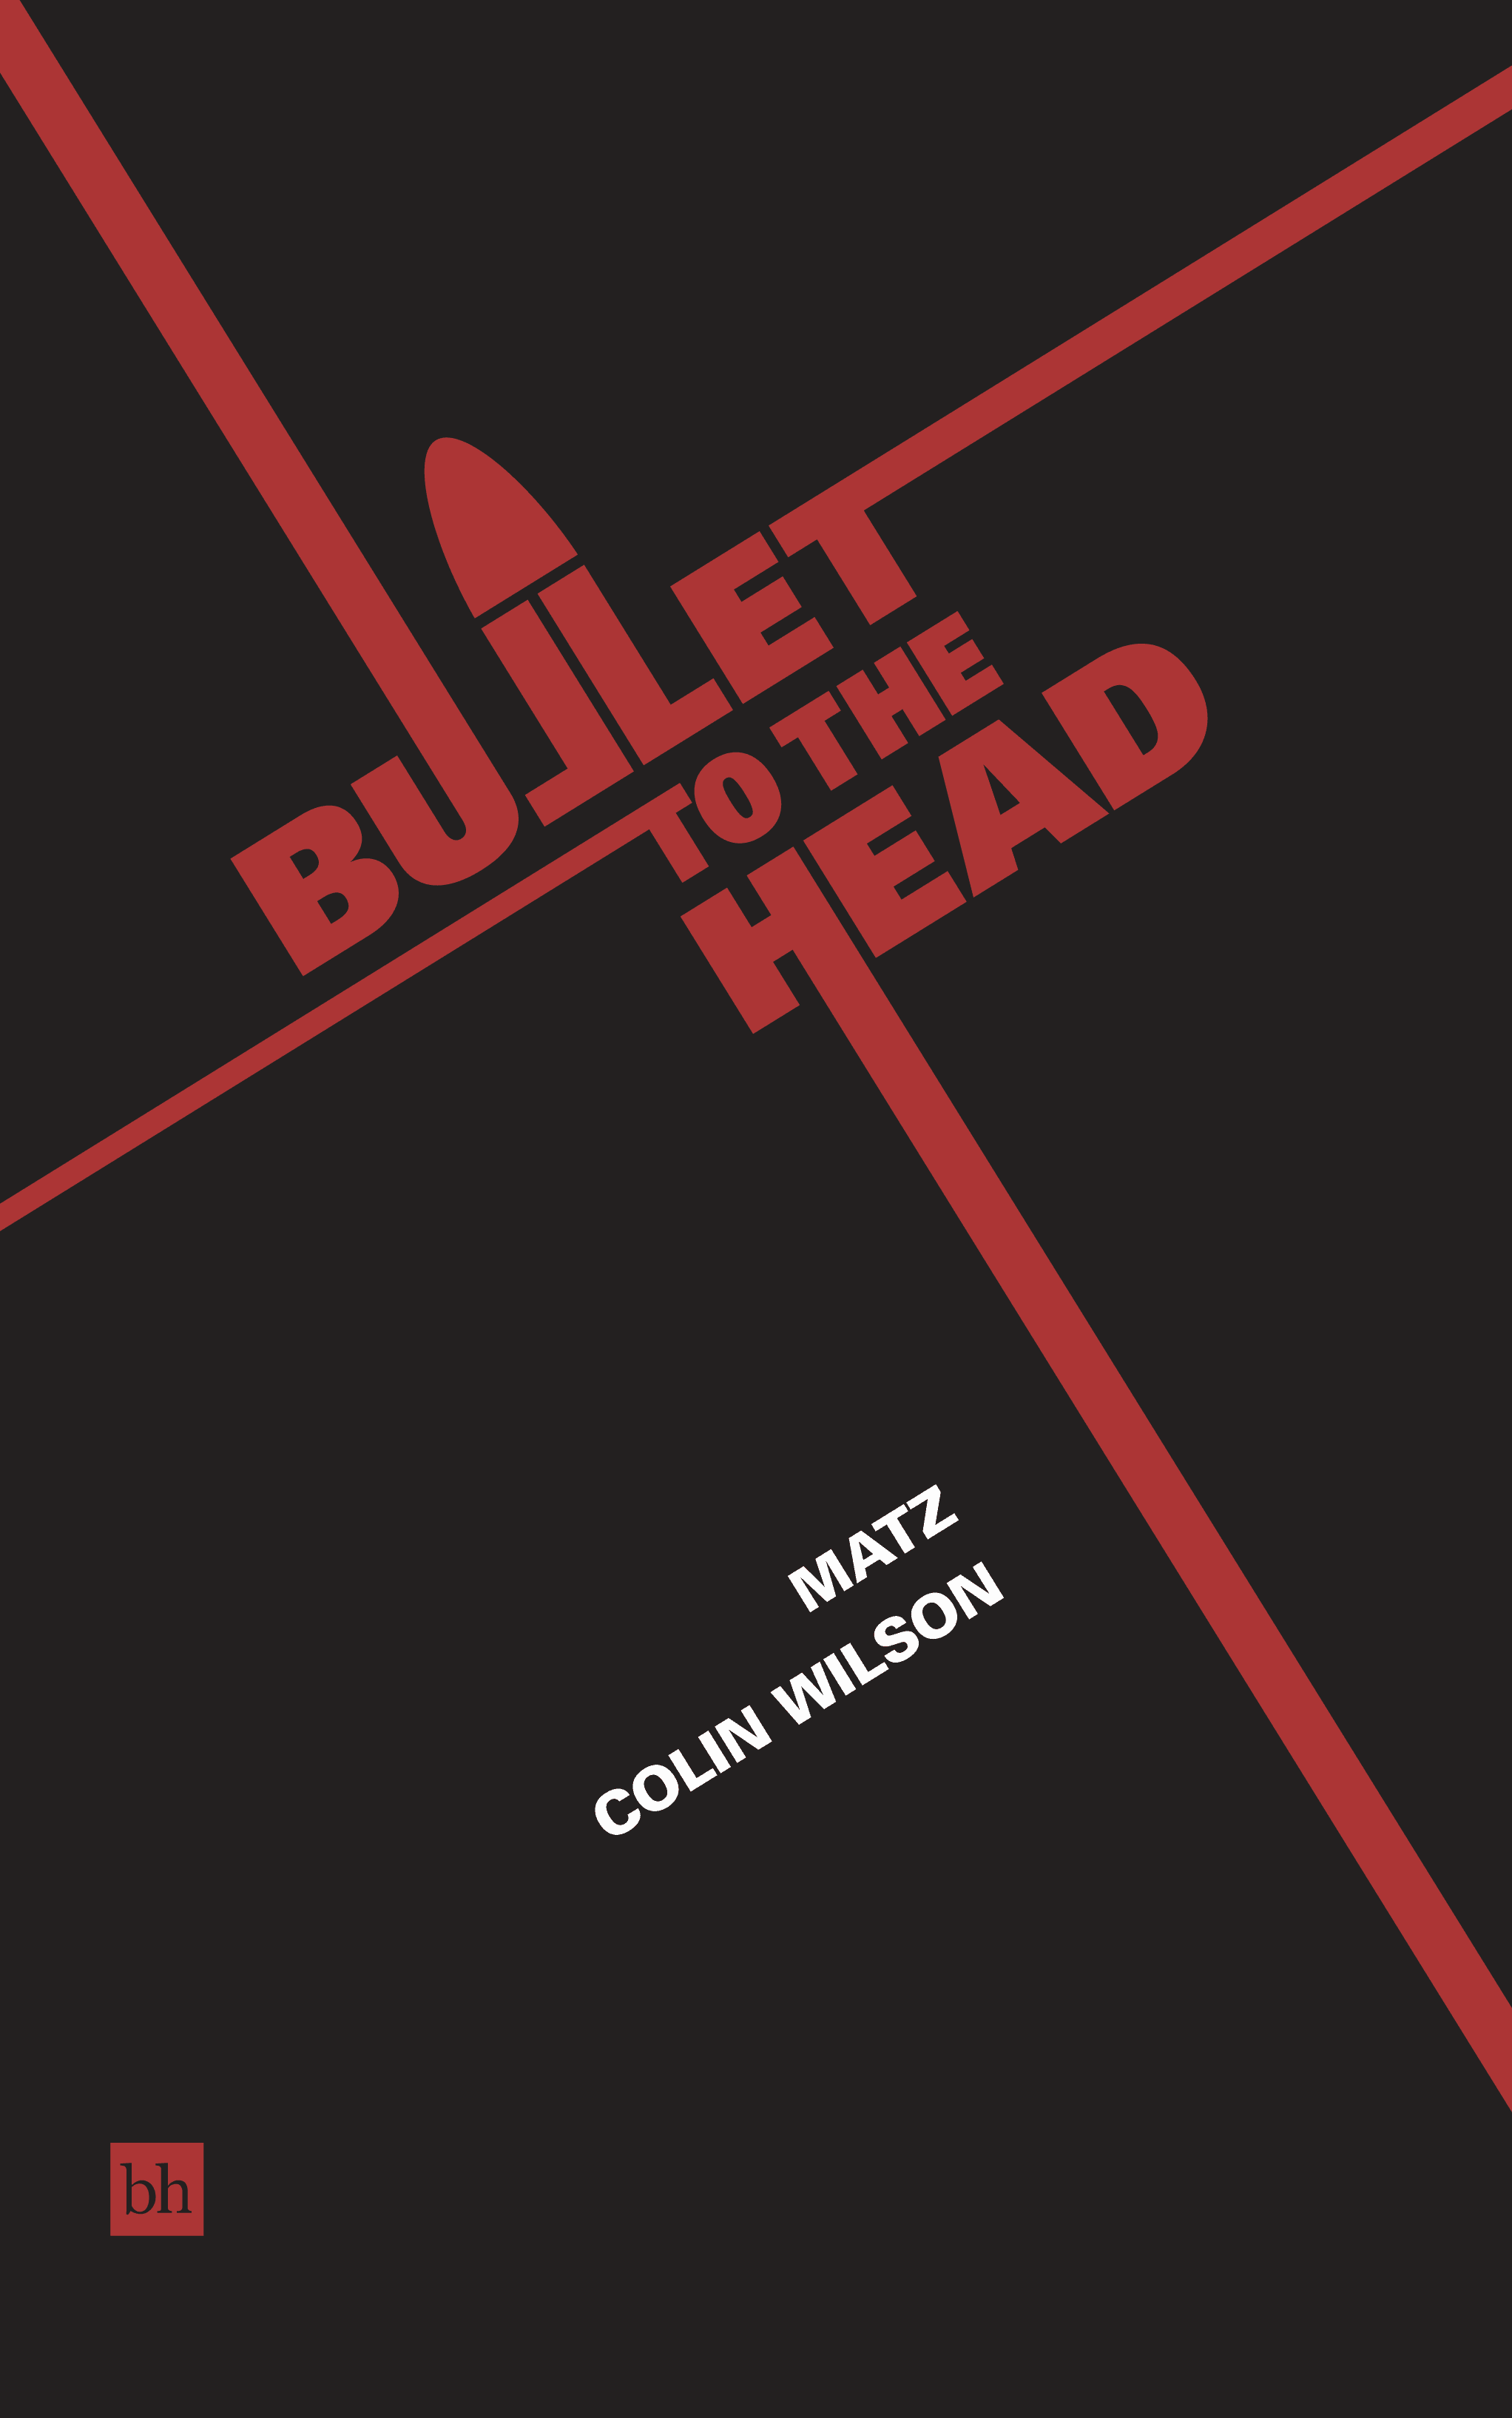 Bullet To The Head by Matz